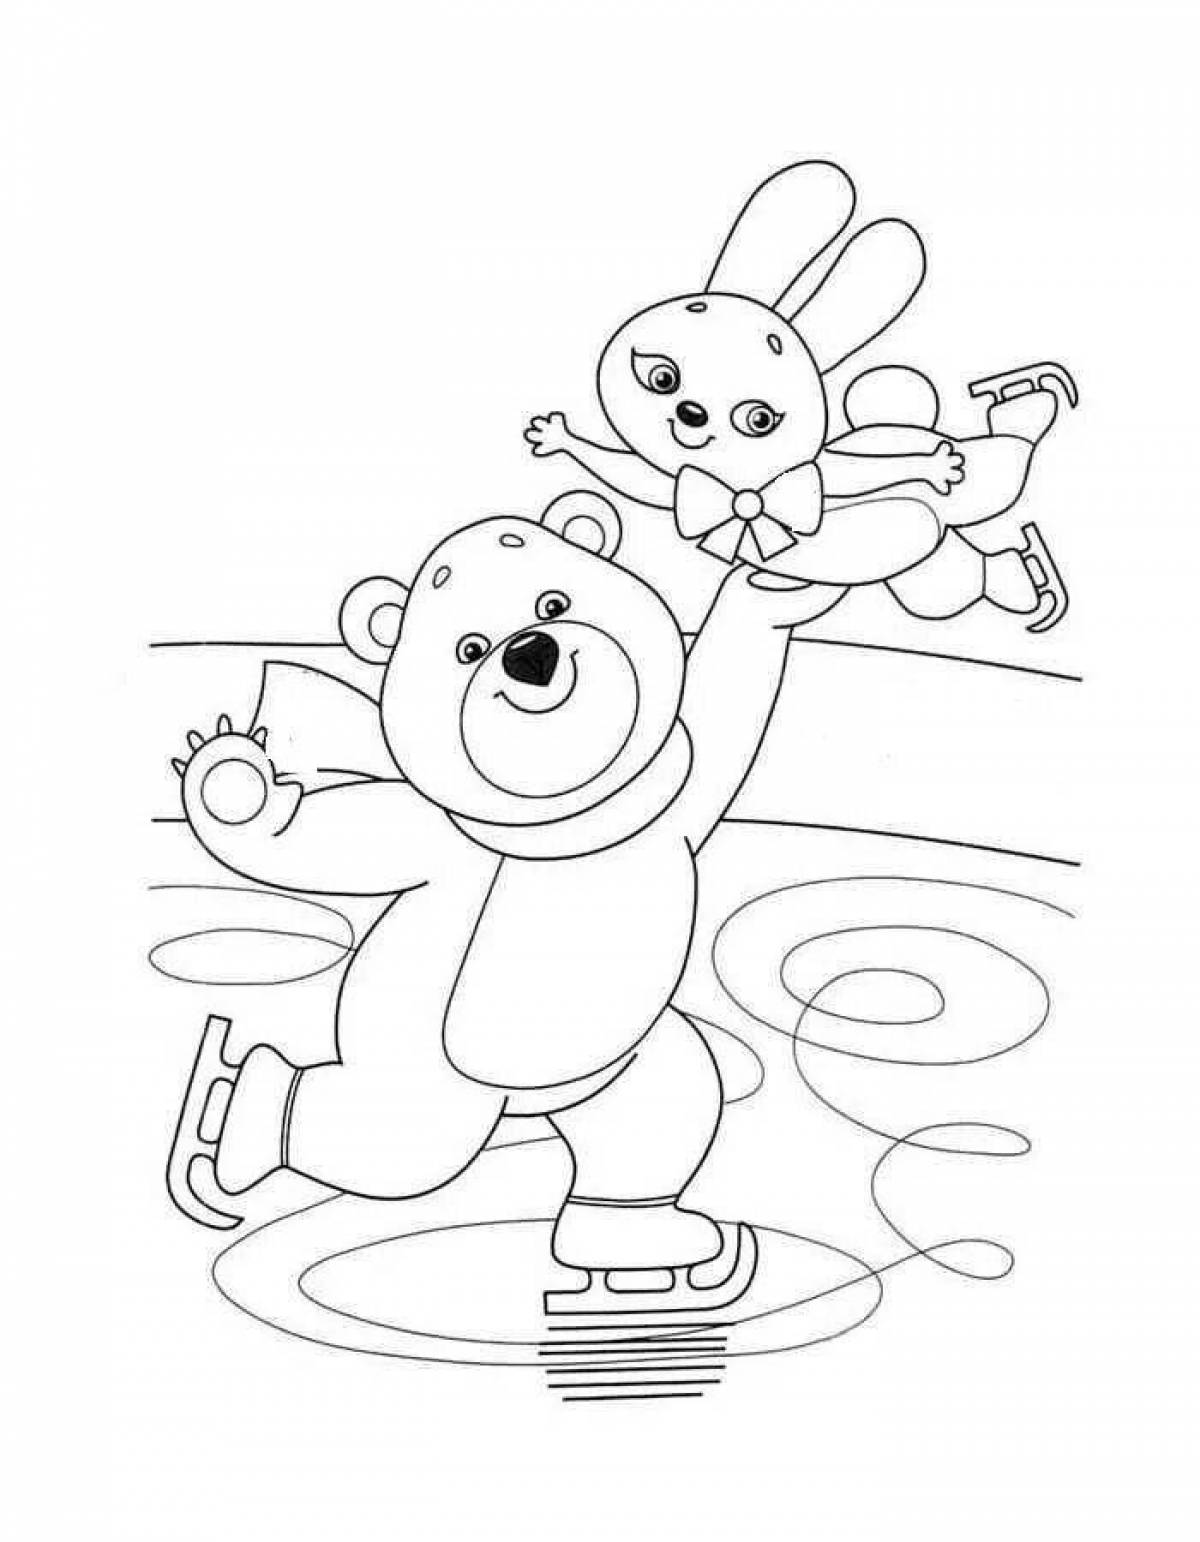 Coloring page dazzling olympic bear